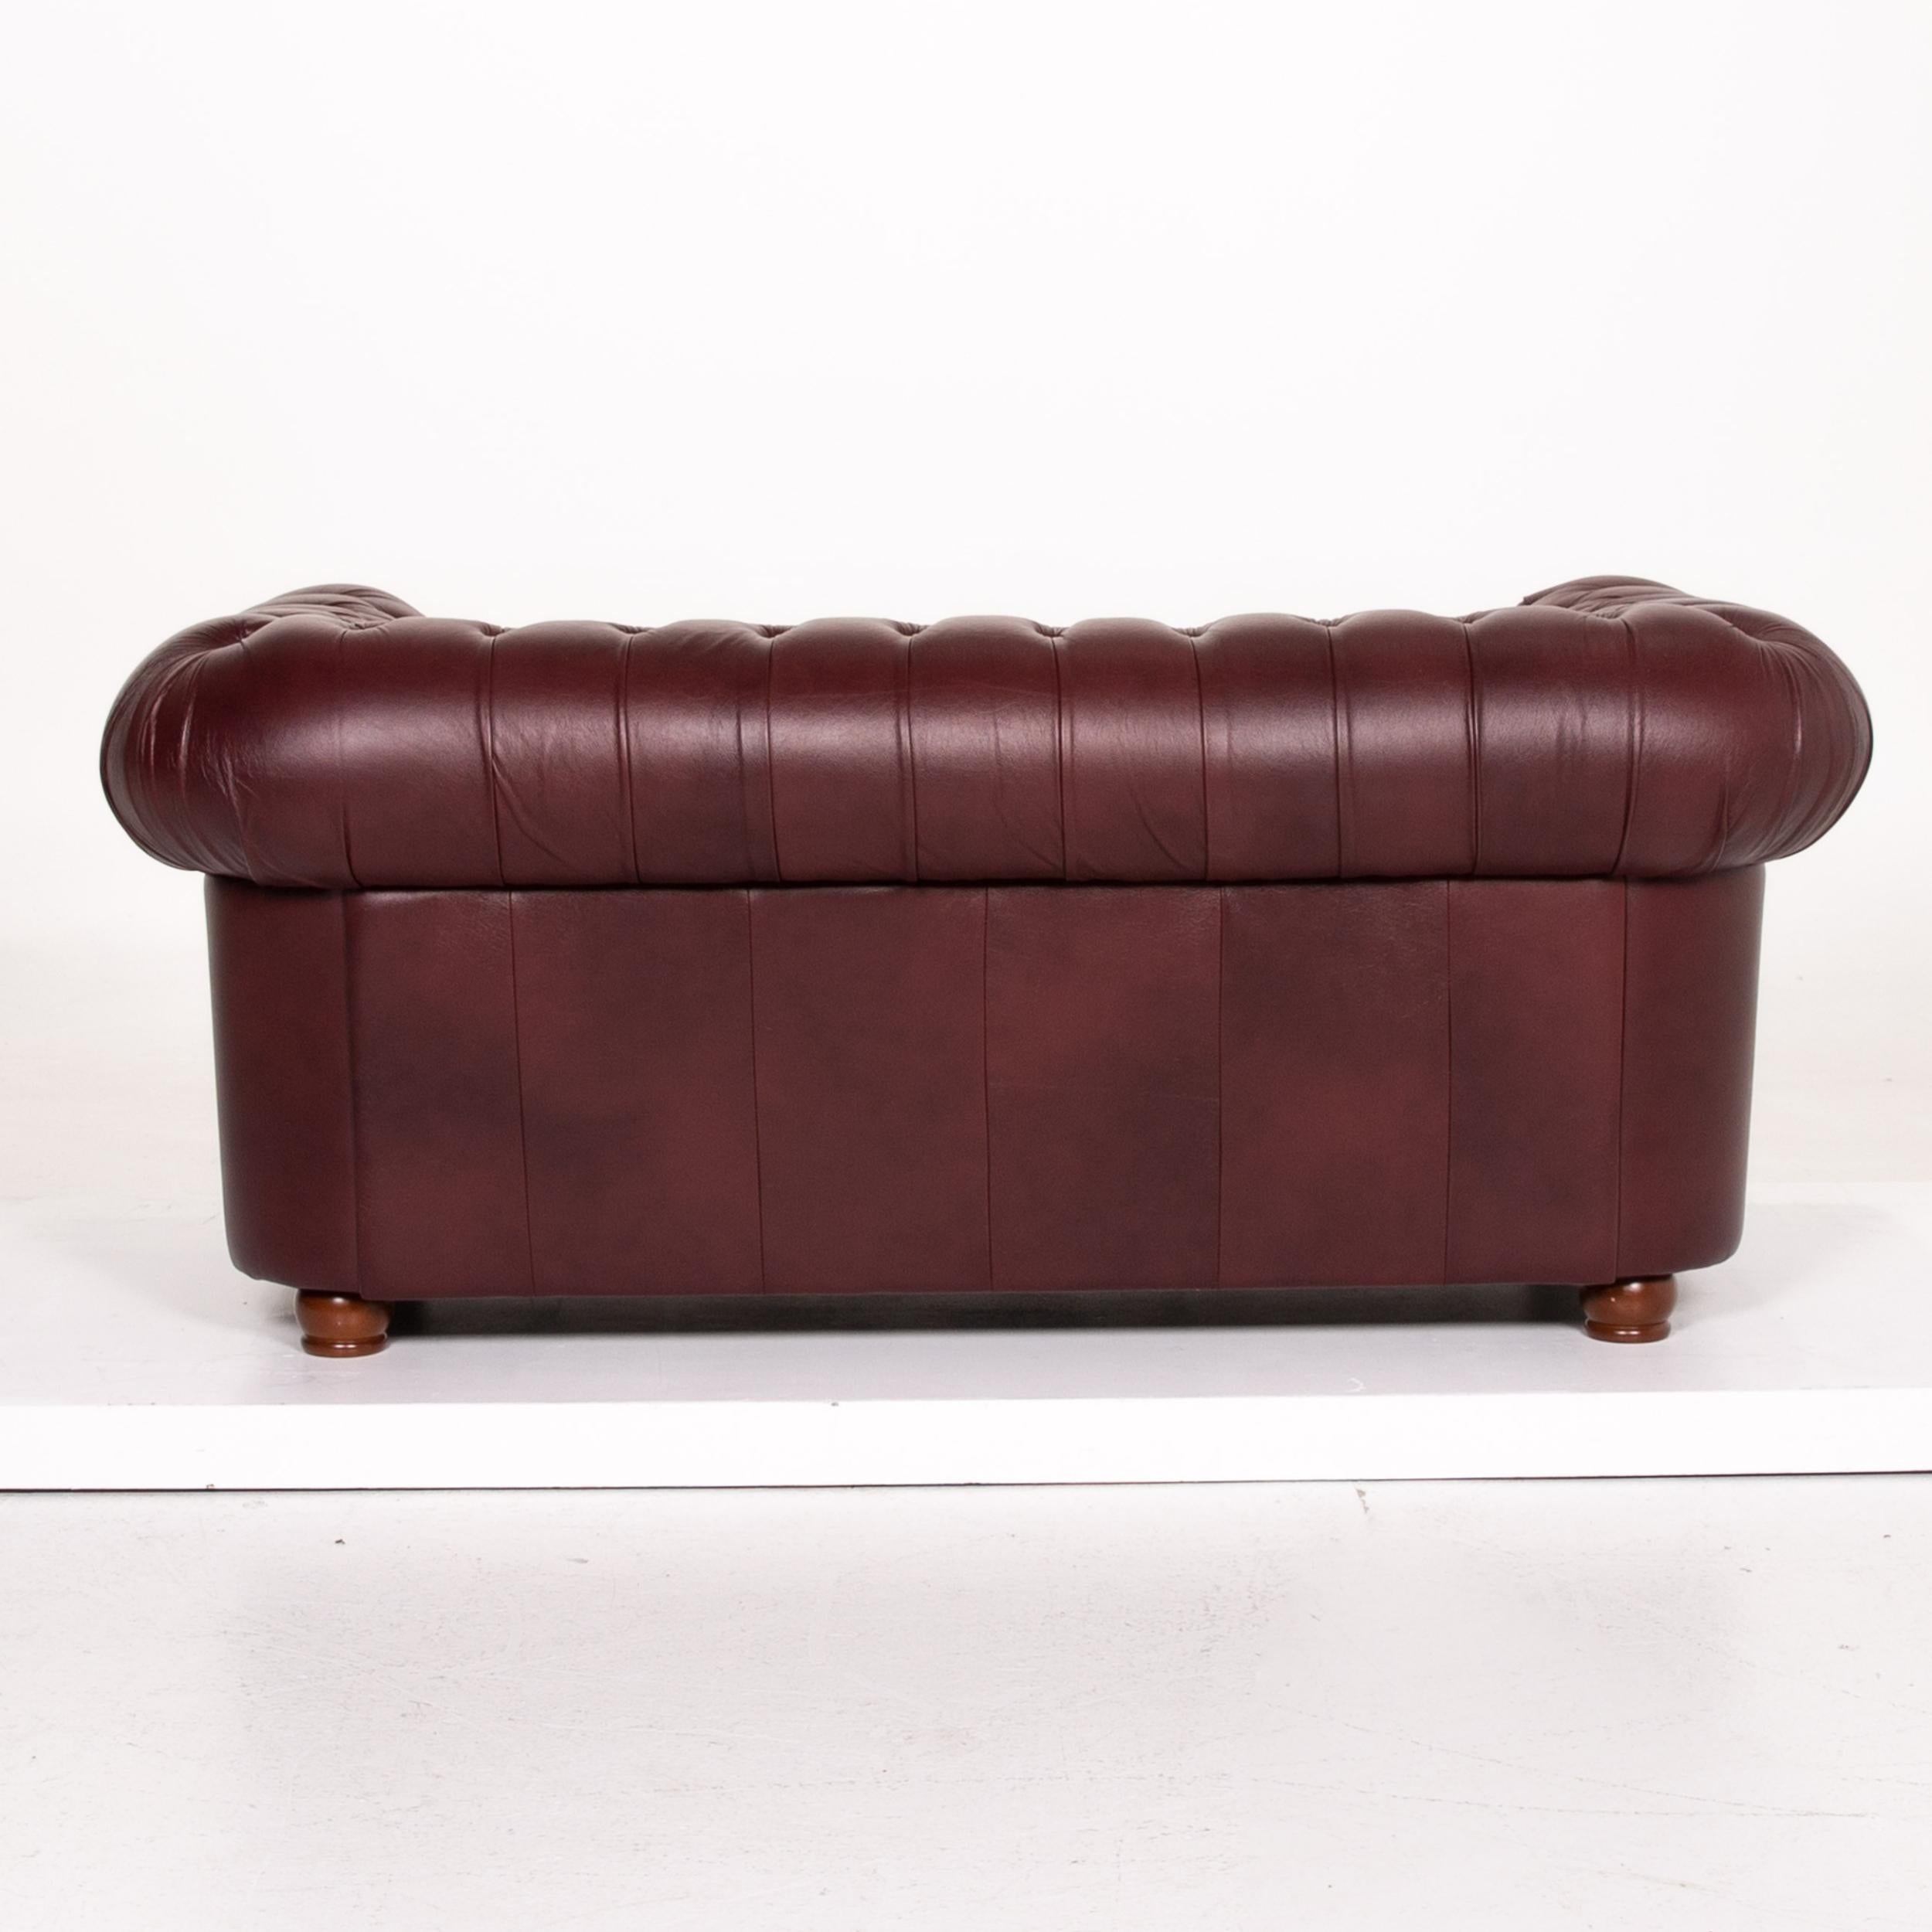 Contemporary Chesterfield Leather Sofa Bordeaux Red Two-Seat Vintage Retro Couch For Sale